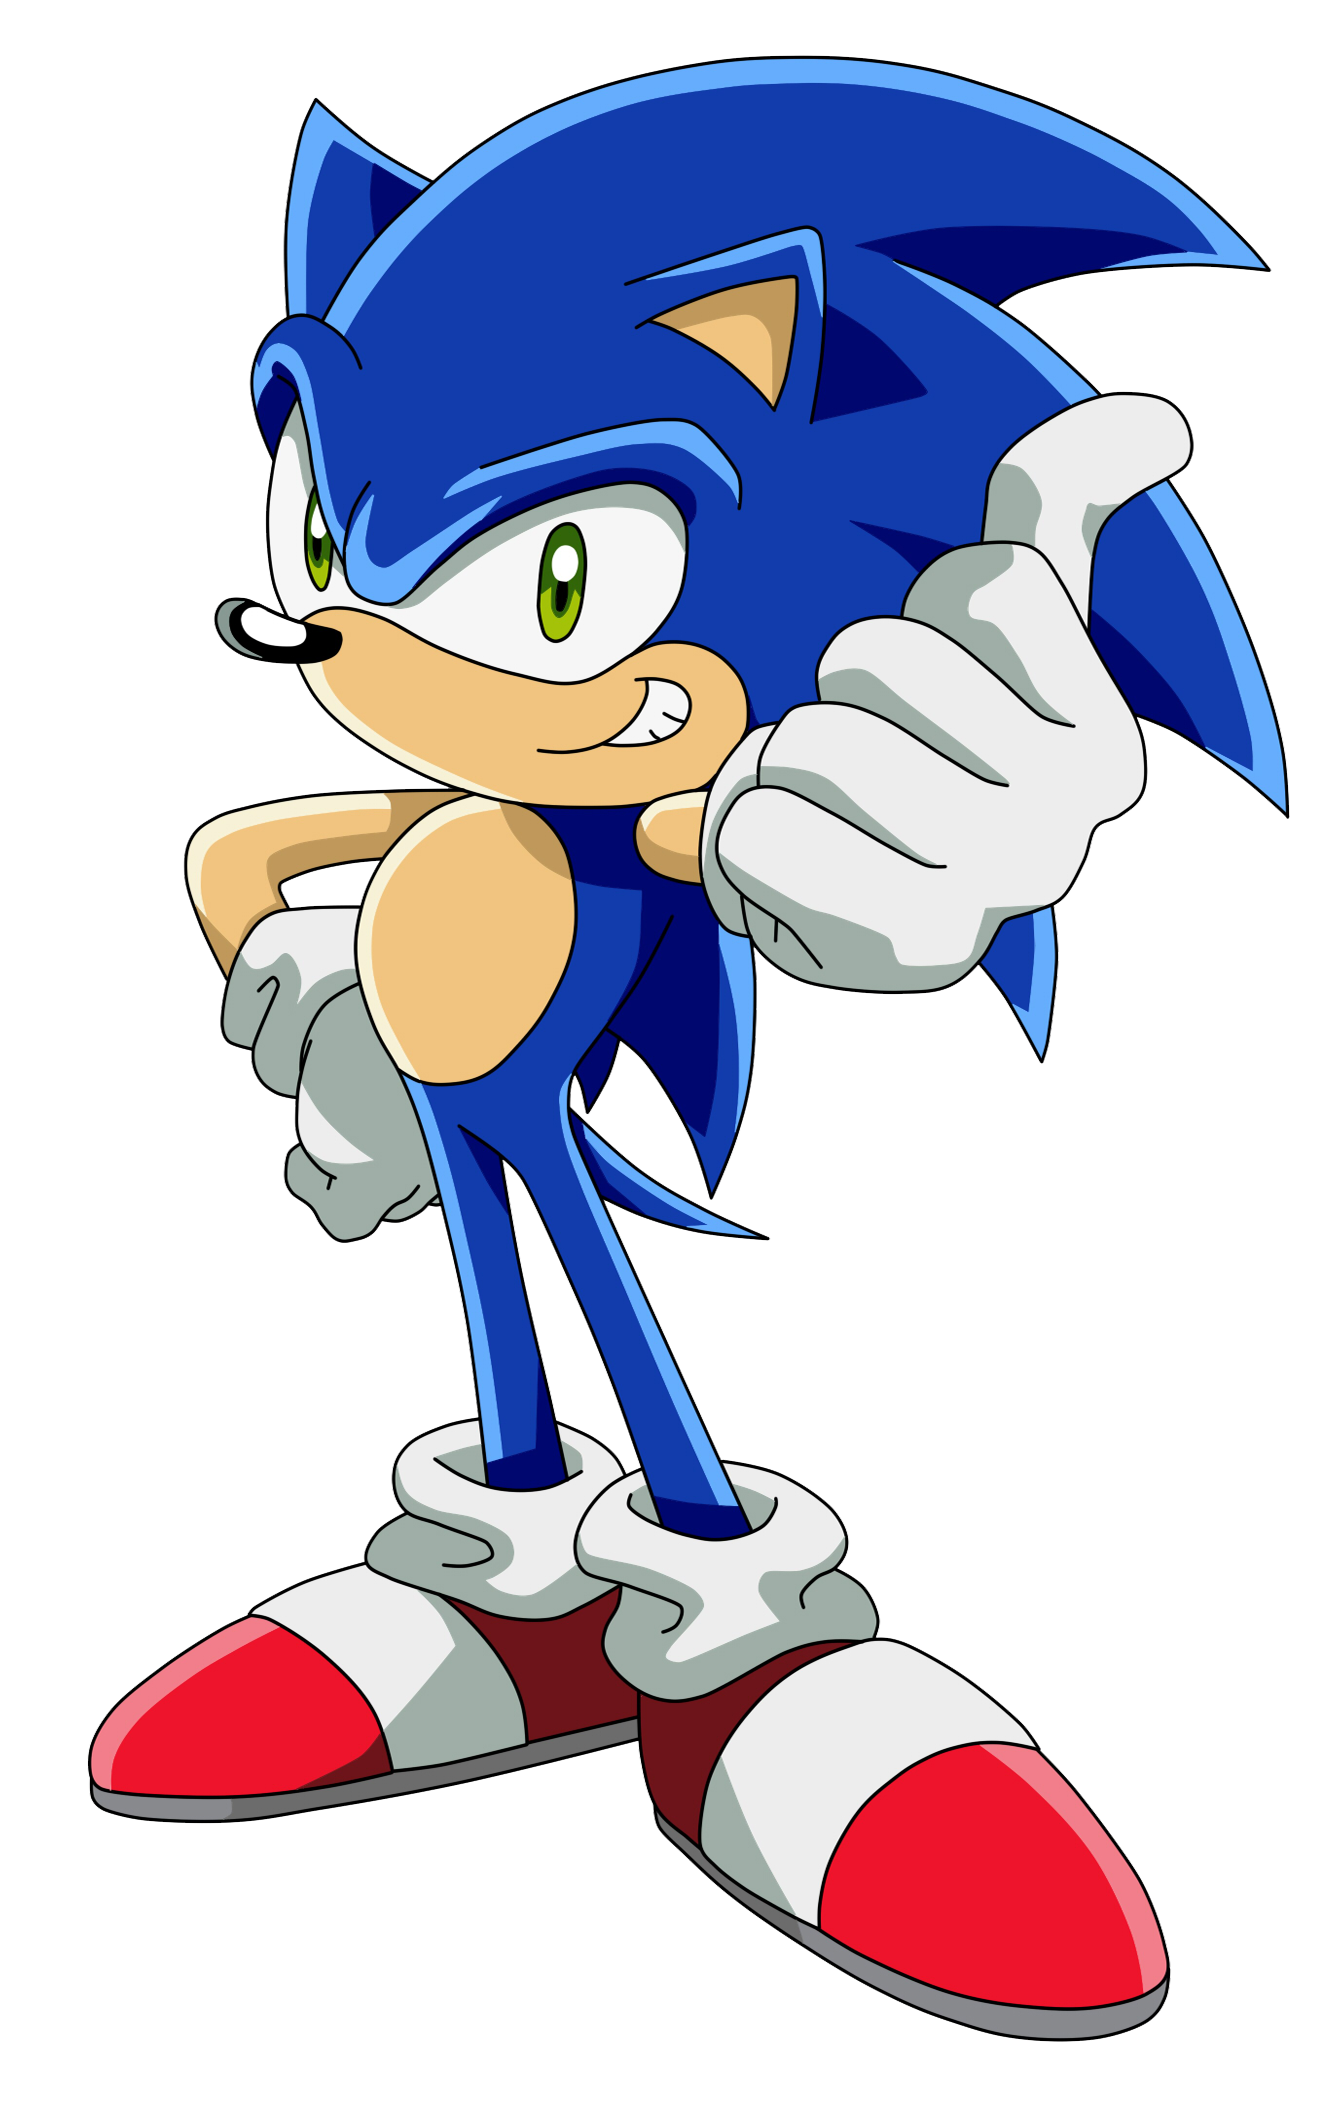 Sonic the Hedgehog, Sonic X Project Wiki